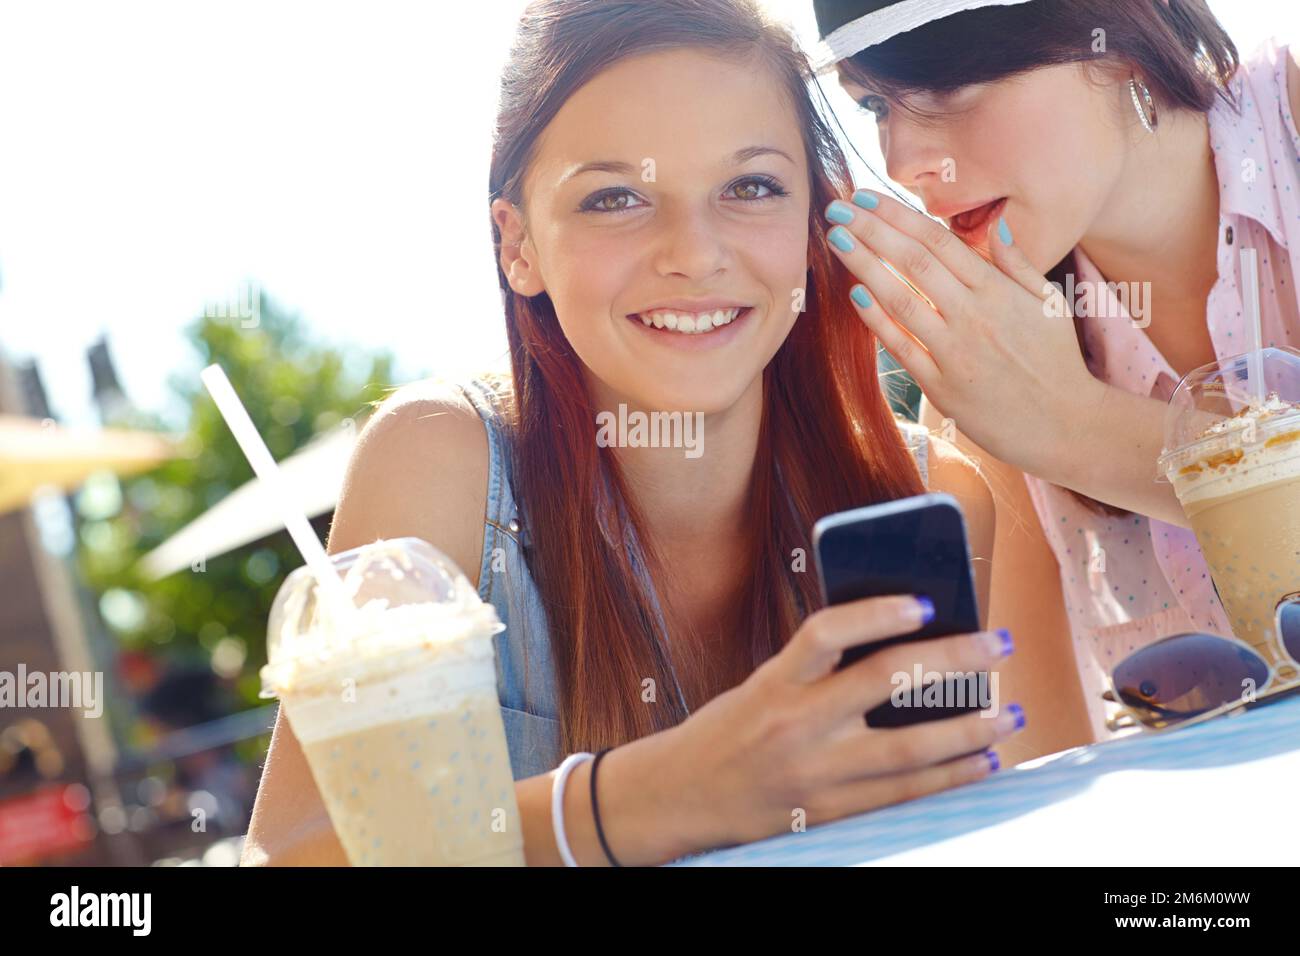 Spread the word...A teenage girl texting on a cellphone while her friend whispers something in her ear. Stock Photo